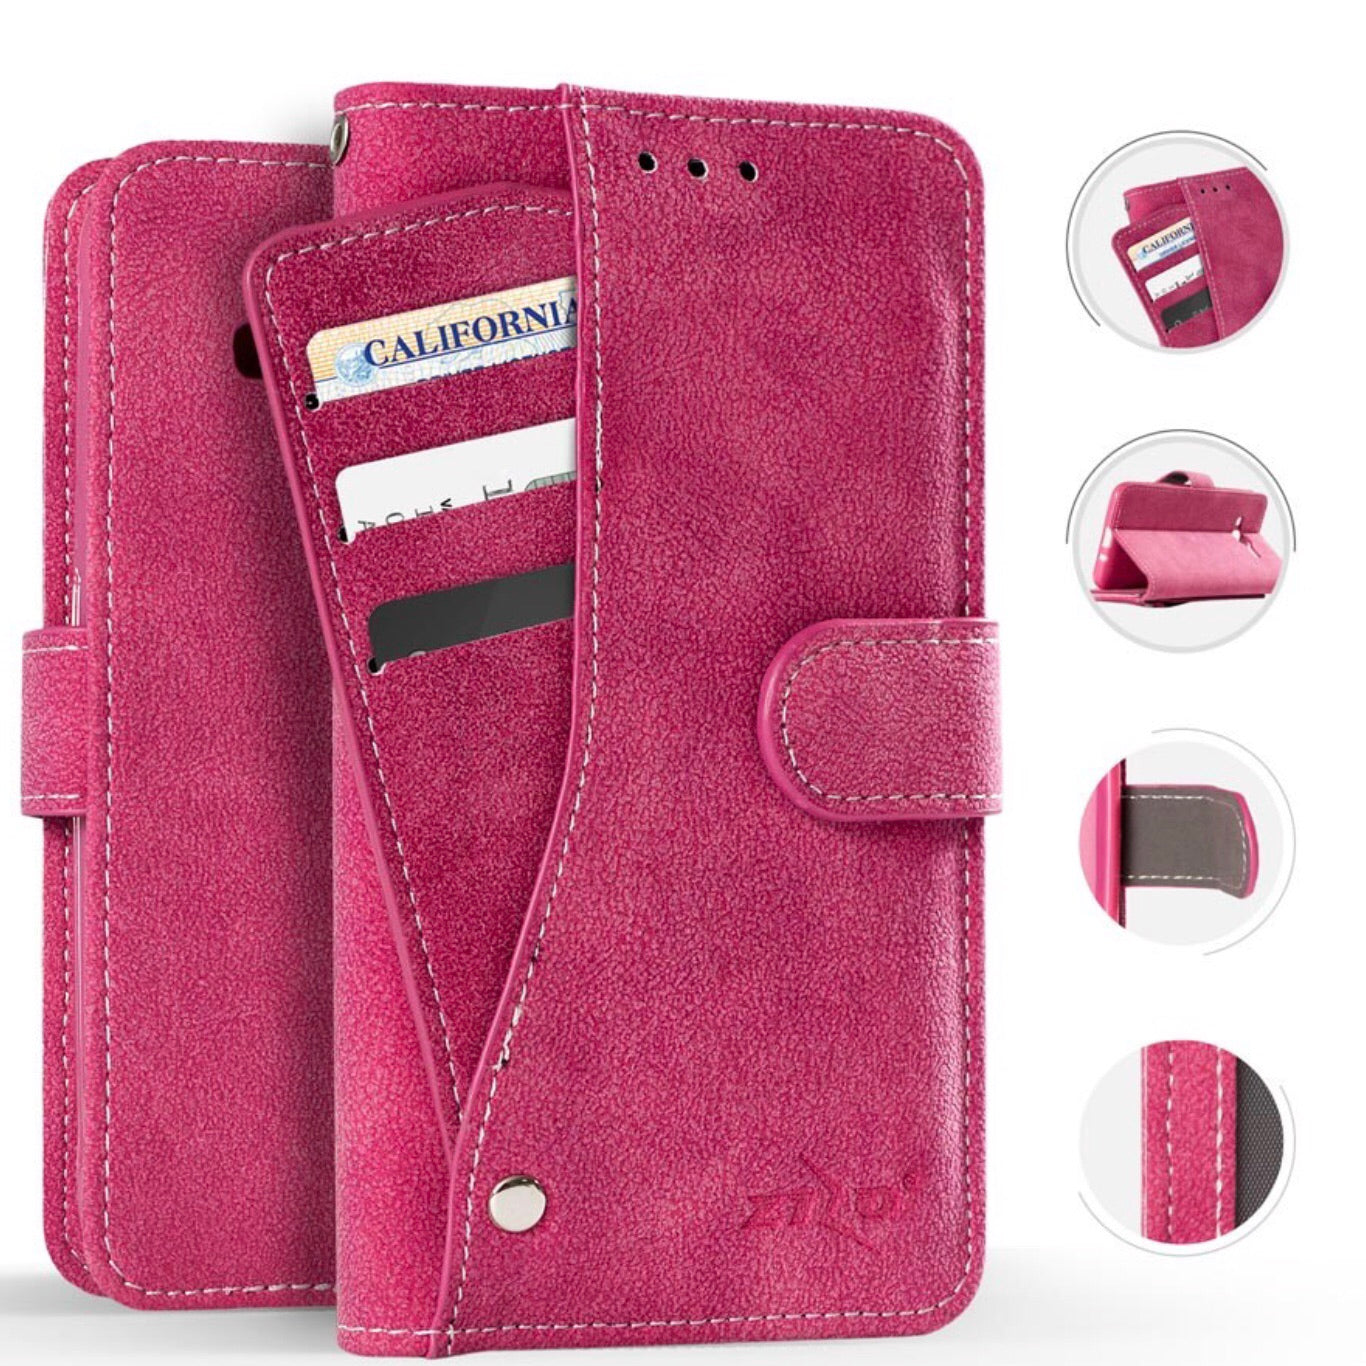 Samsung Galaxy S9+ - Pink Slide Out Pocket Wallet